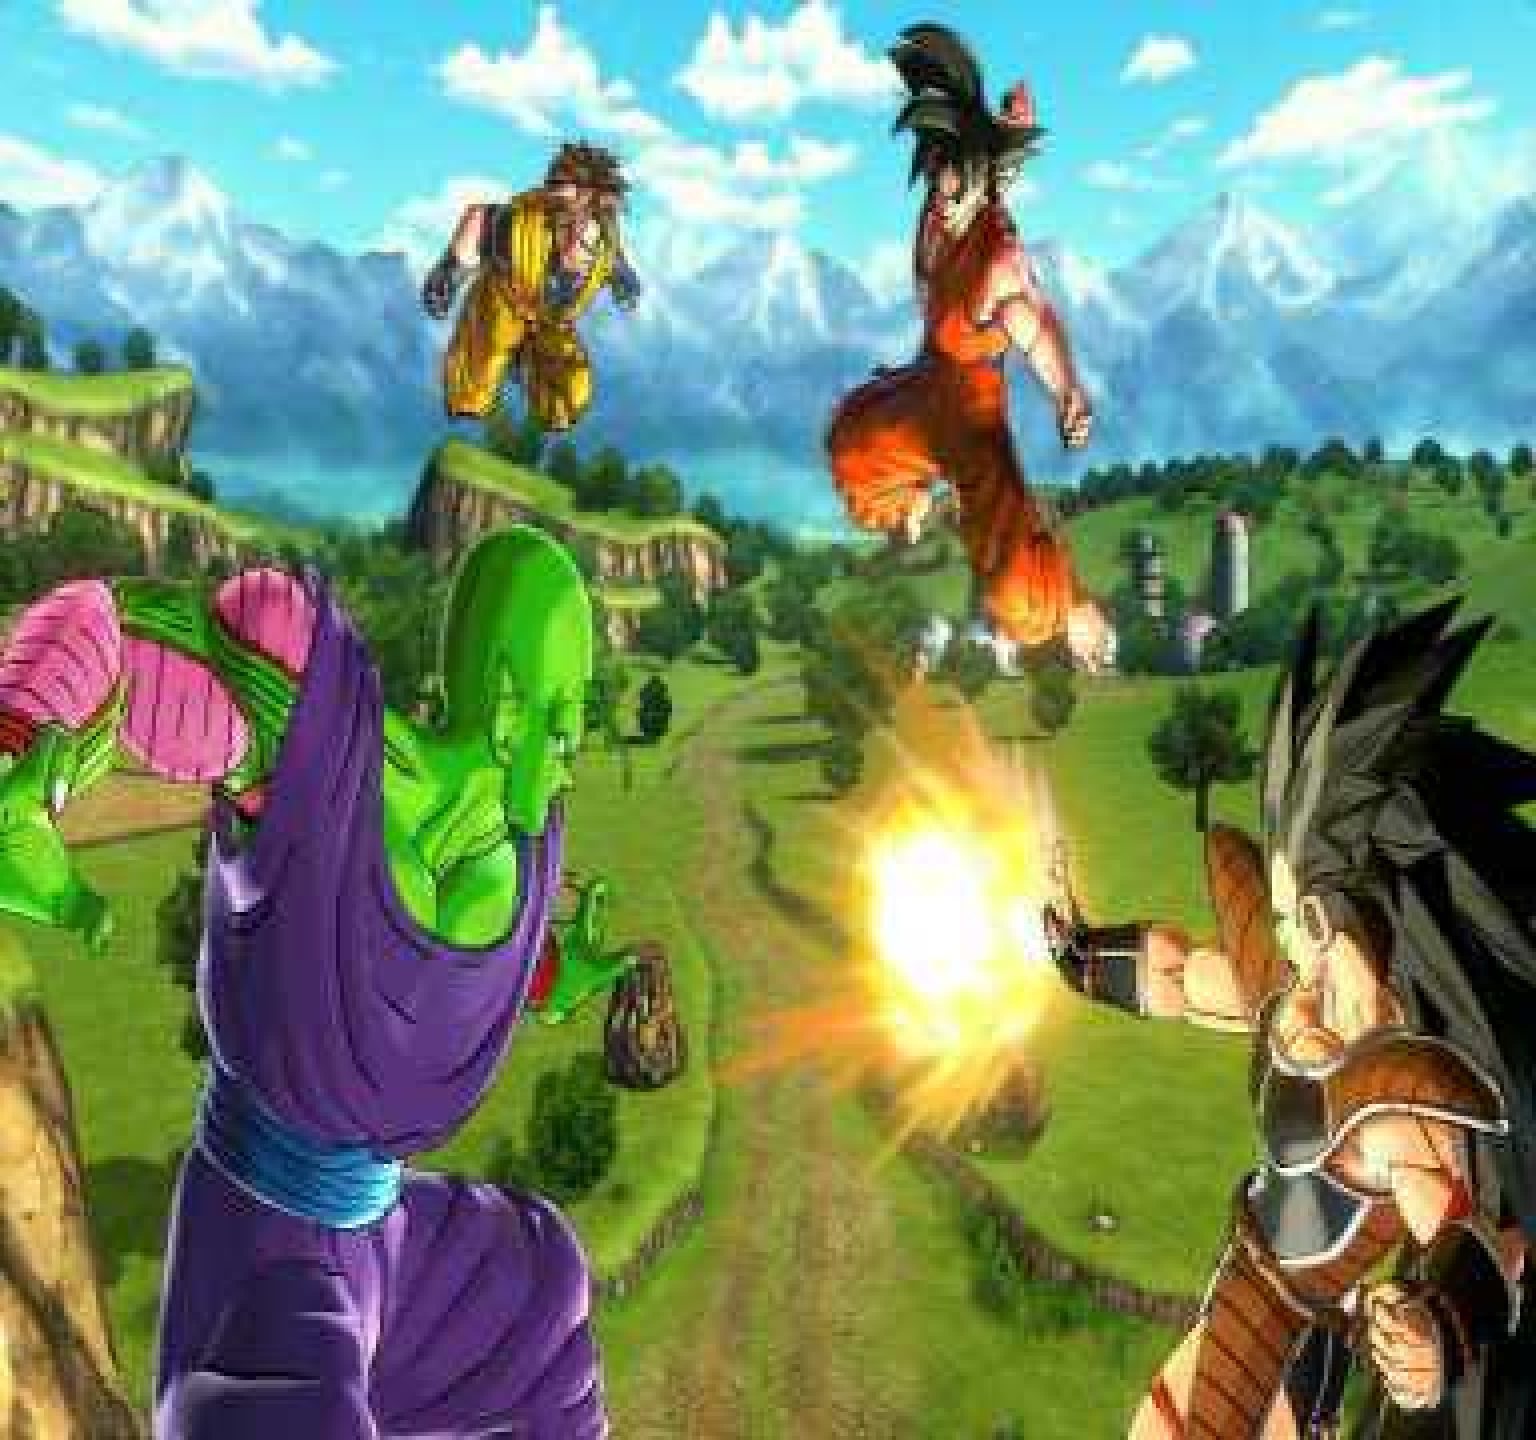 dragon ball xenoverse 2 pc system requirements